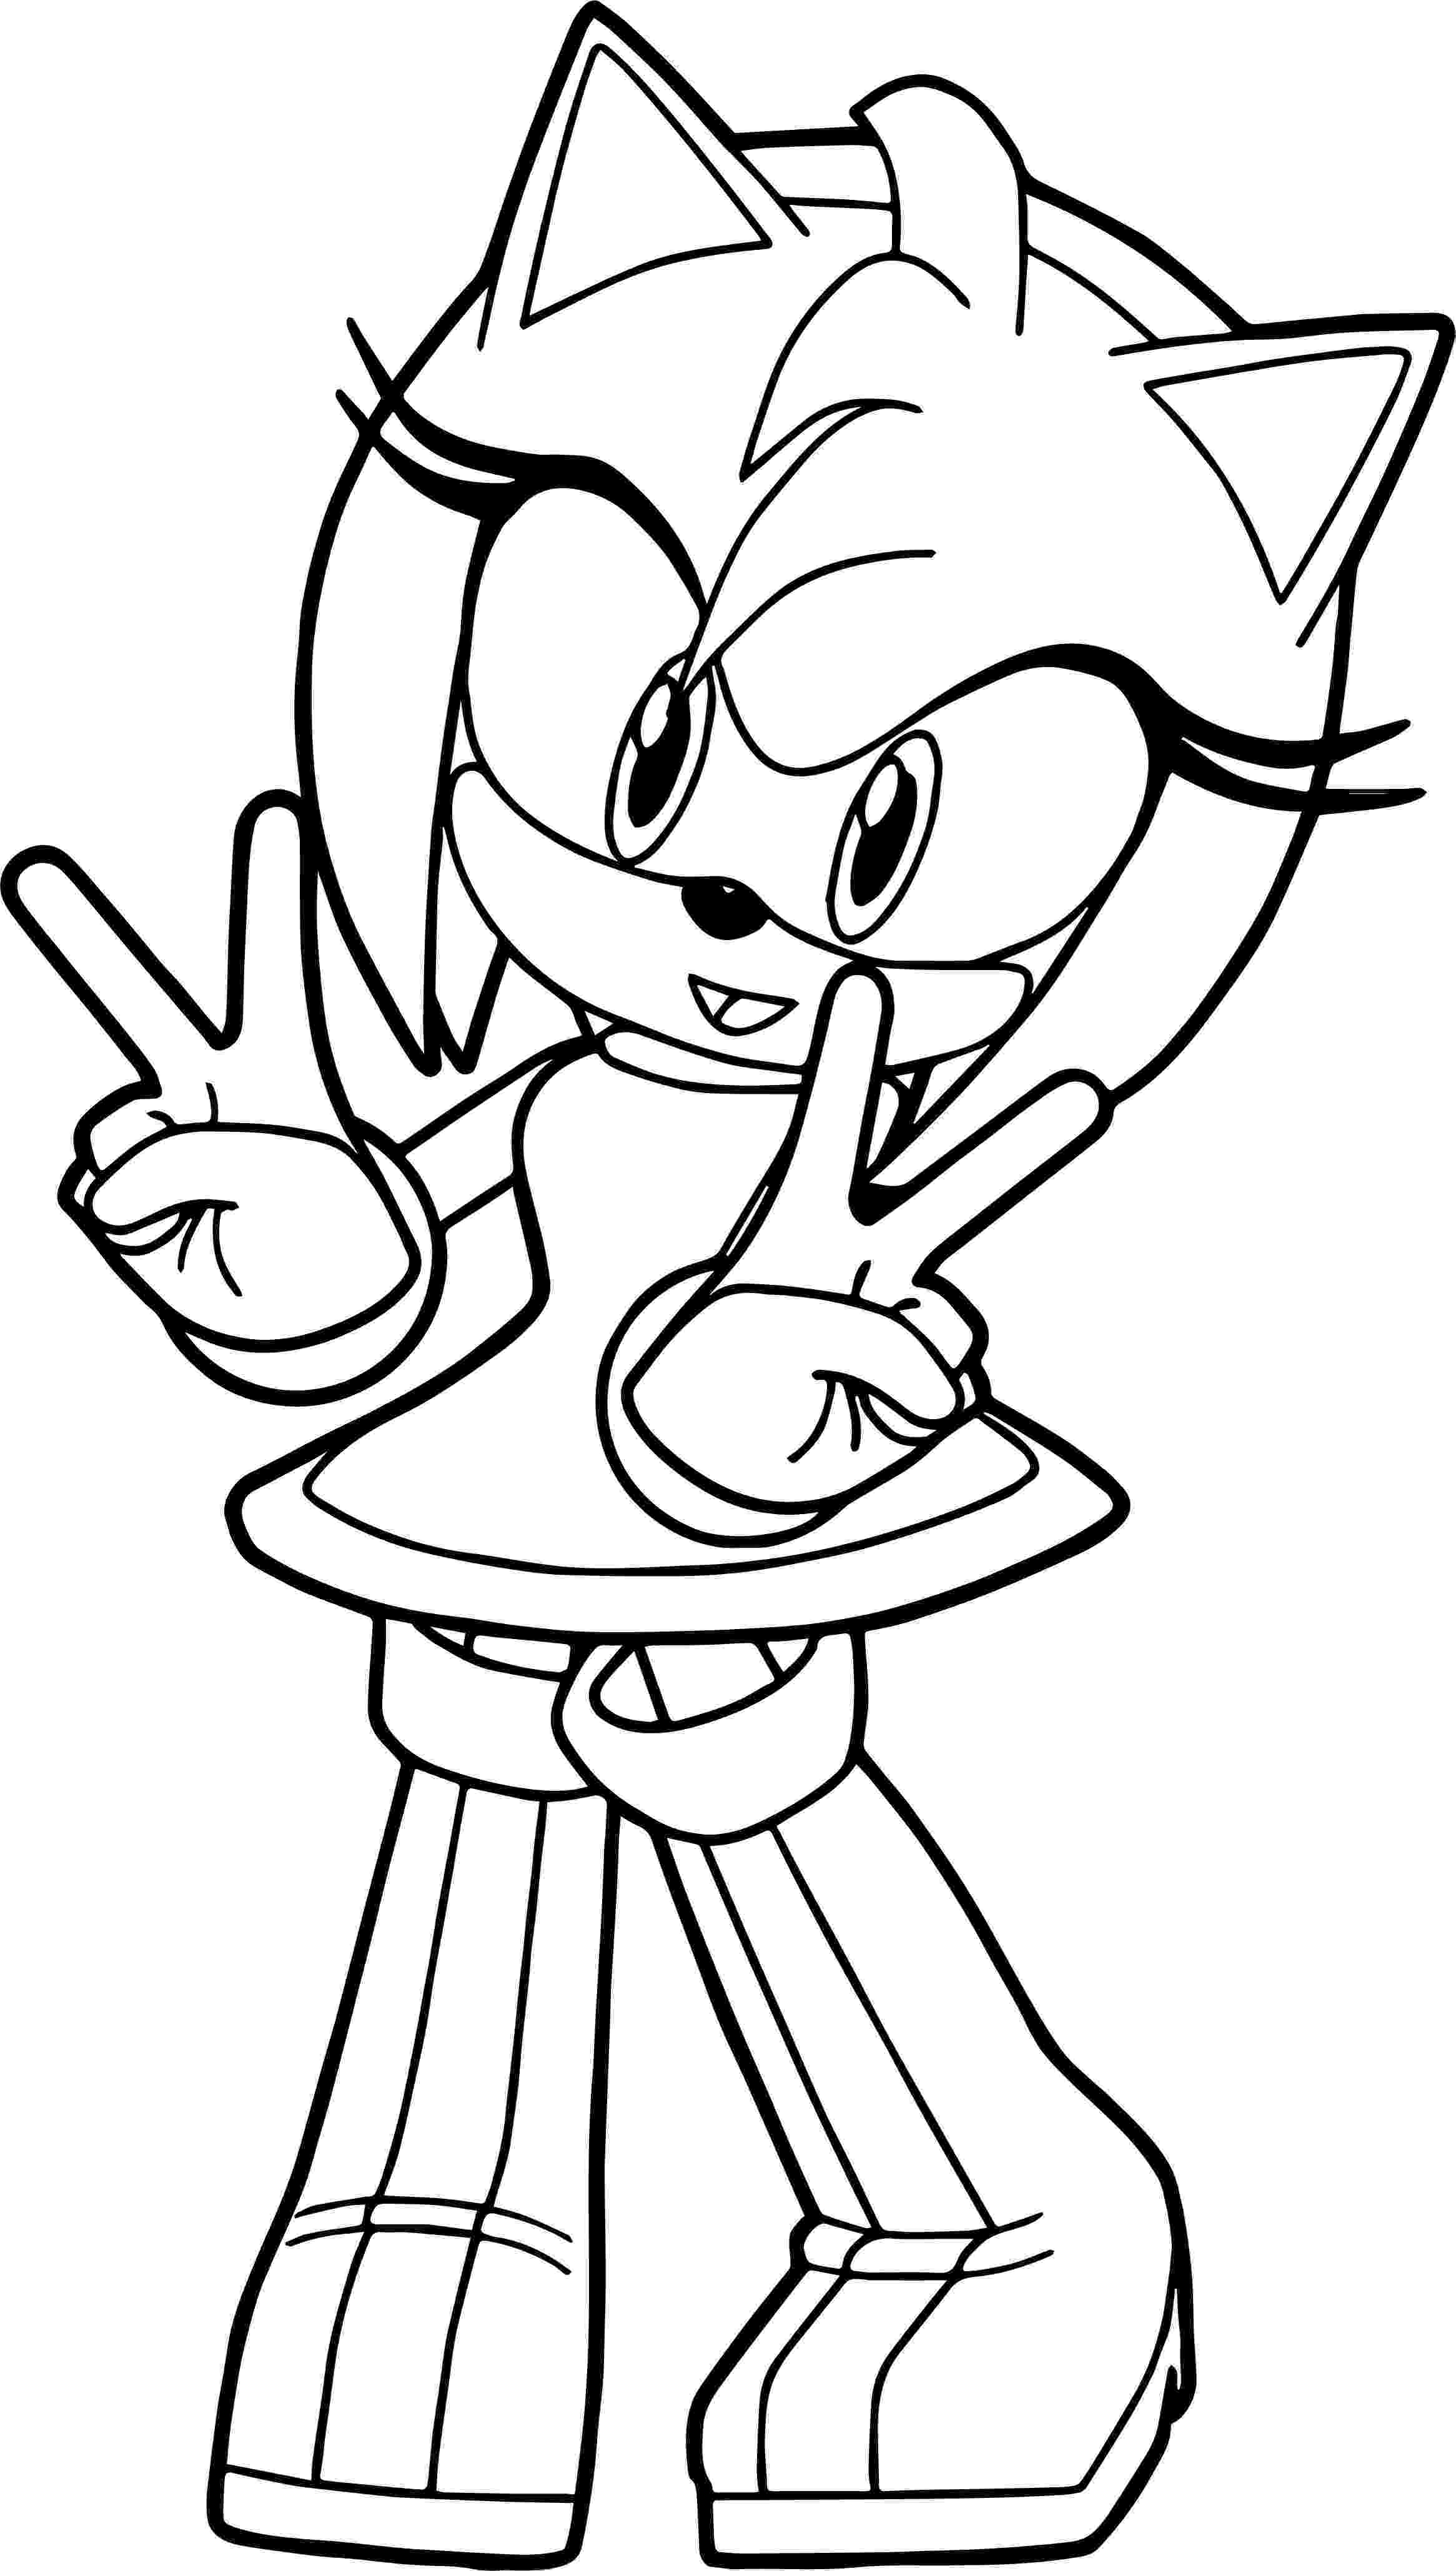 amy rose coloring pages amy rose coloring pages to download and print for free pages rose amy coloring 1 1